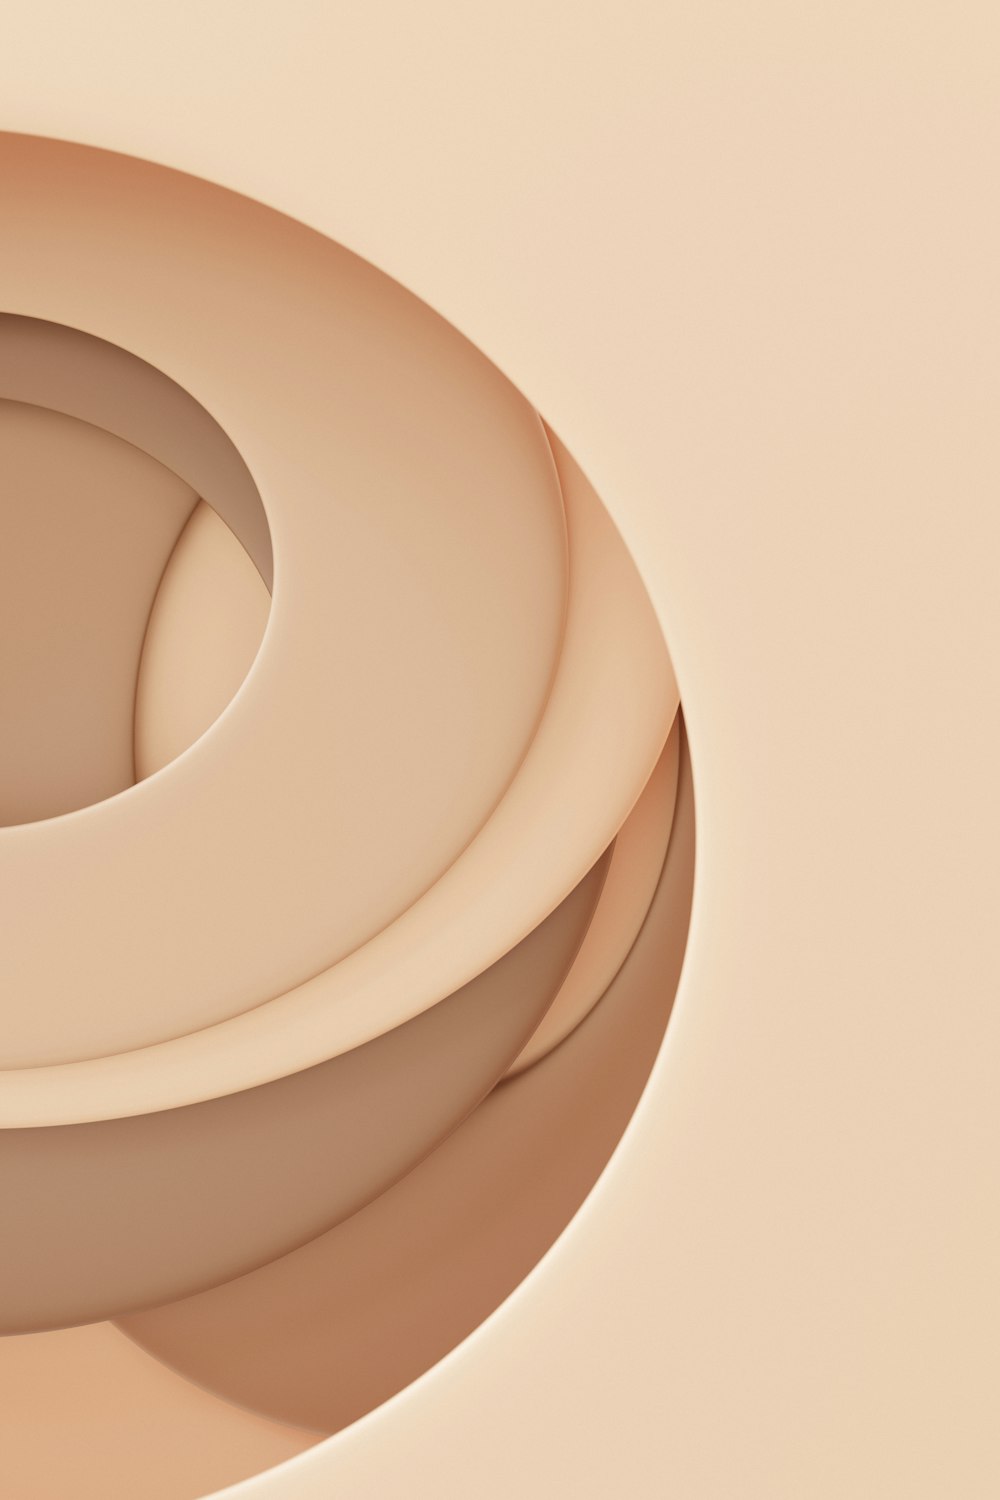 a close up of a circular object on a beige background